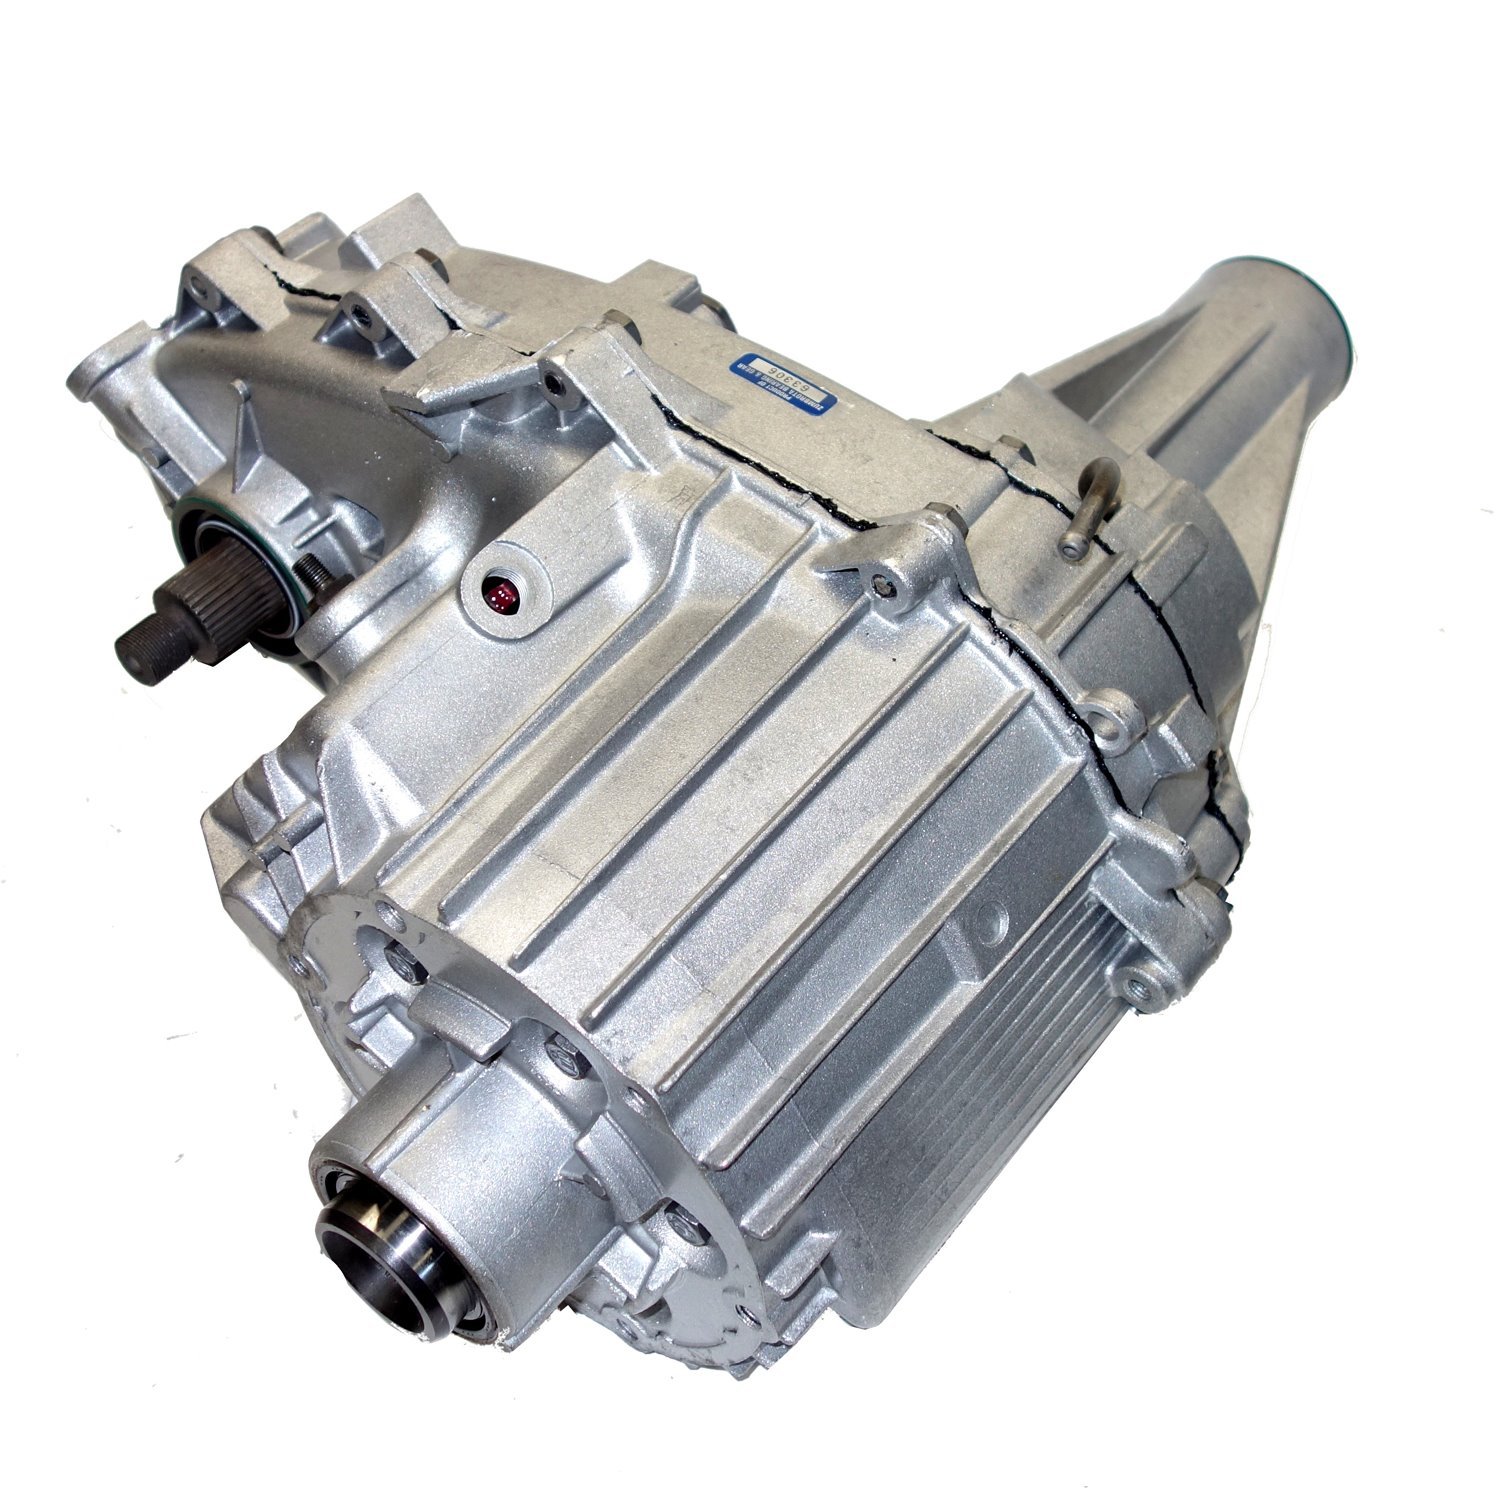 Remanufactured NP208 Transfer Case for Chrysler 82-87 W-series